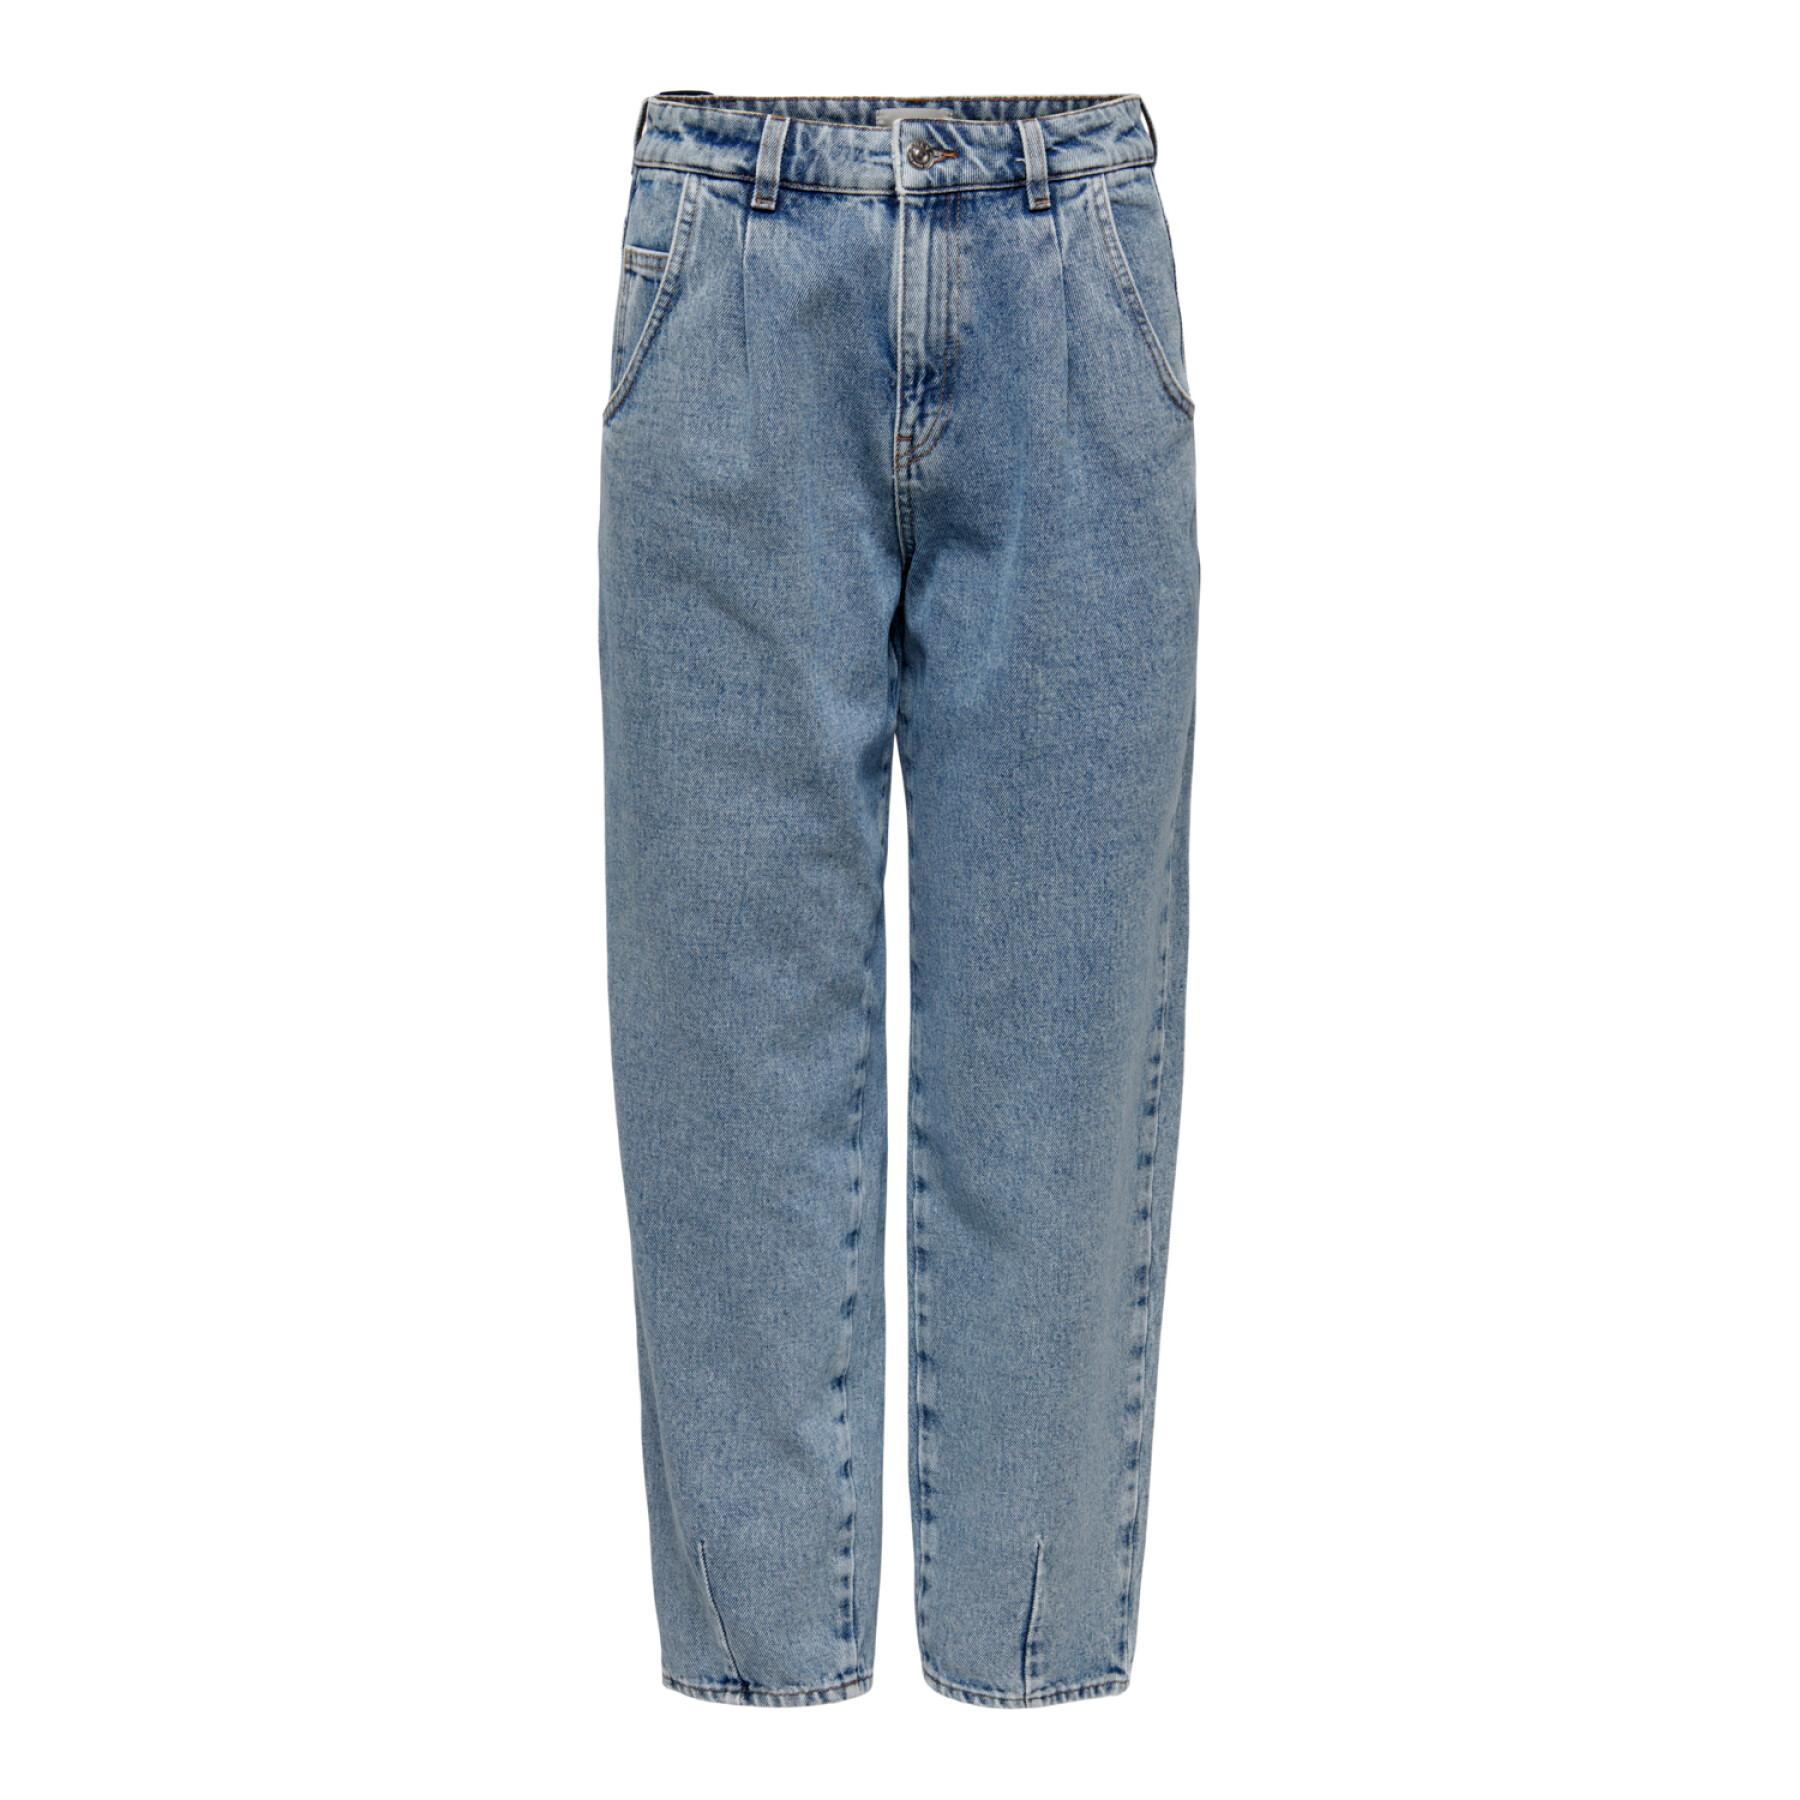 Jeans femme Only onlverna-bomb